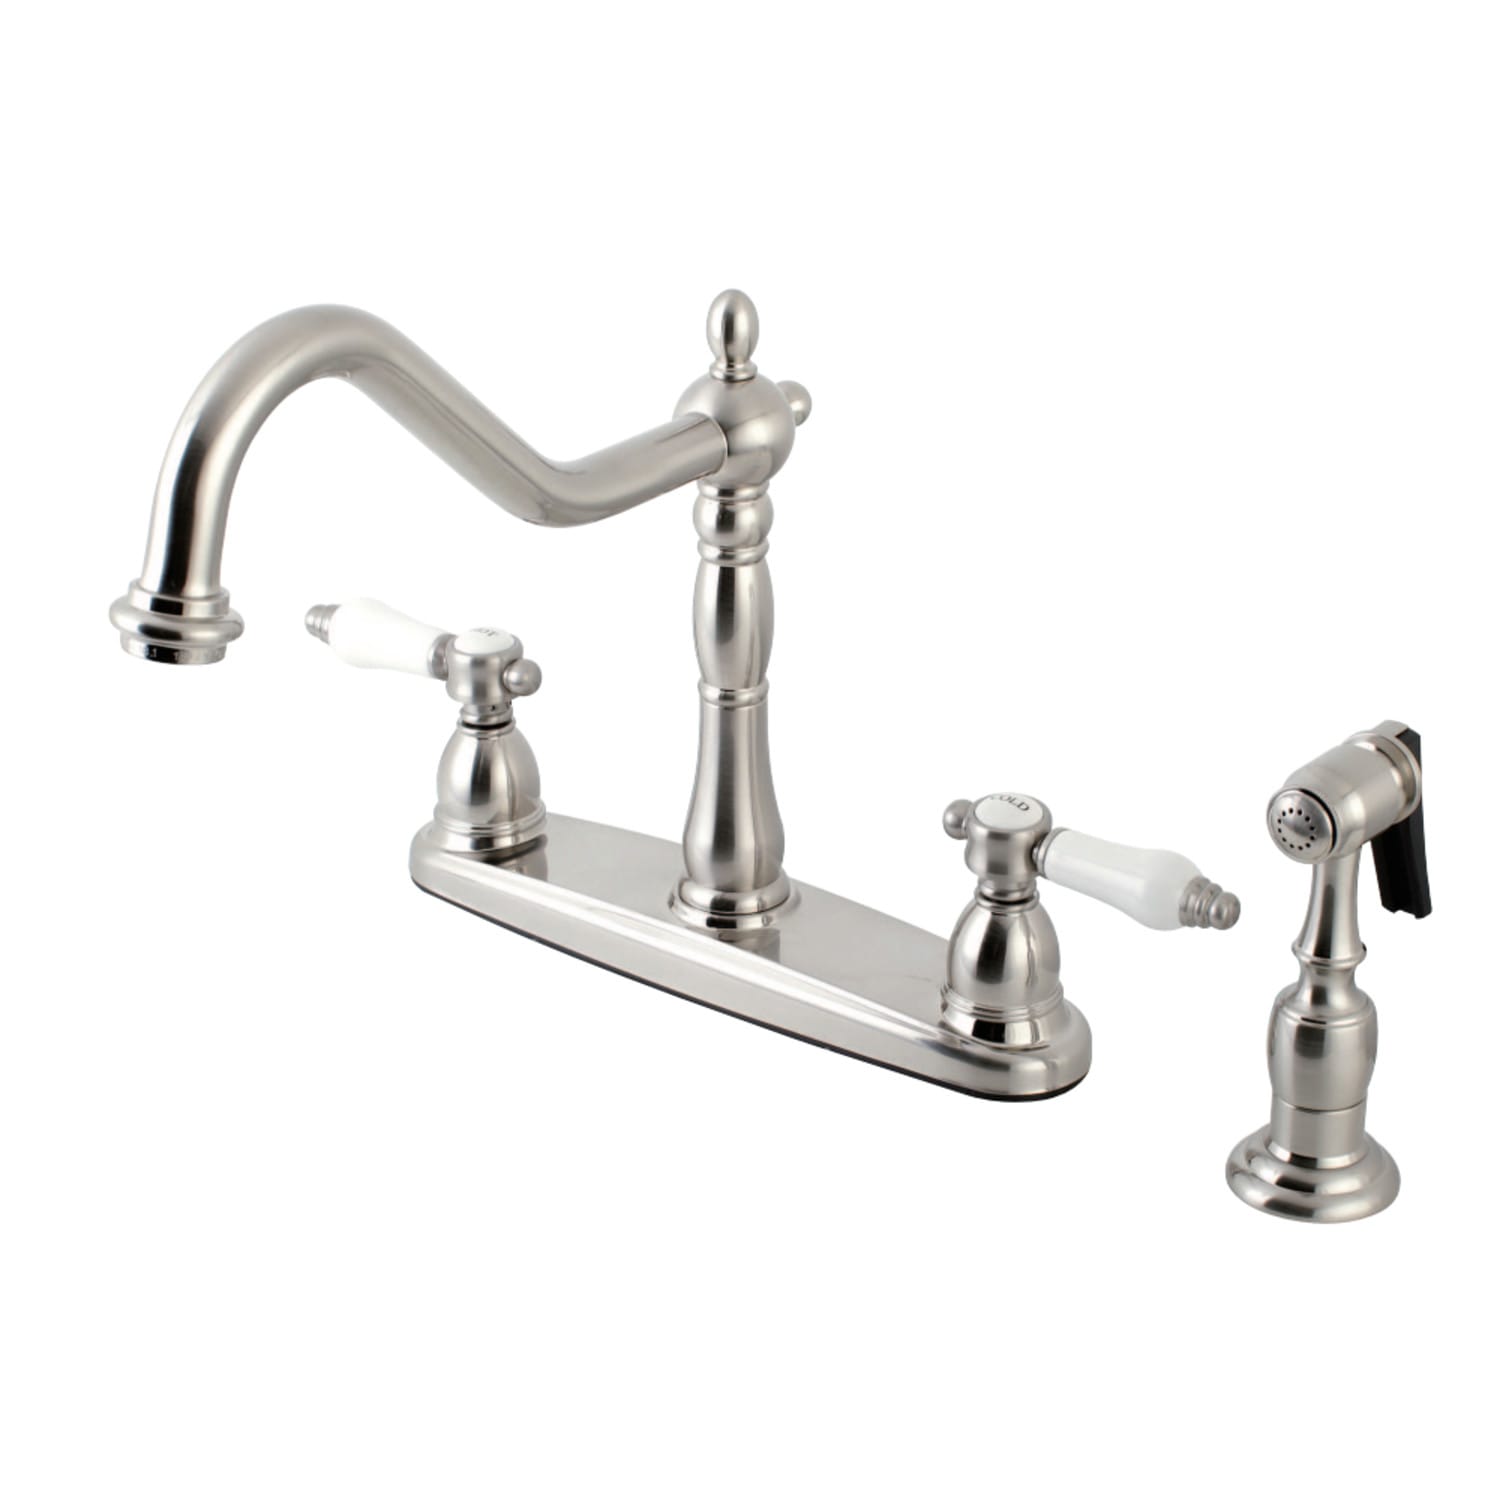 Kingston Brass KB1755BPLBS Bel Air 8 inch Centerset Kitchen Faucet with Brass Sprayer Oil Rubbed Bronze 8-5/8 inch In Spout Reach